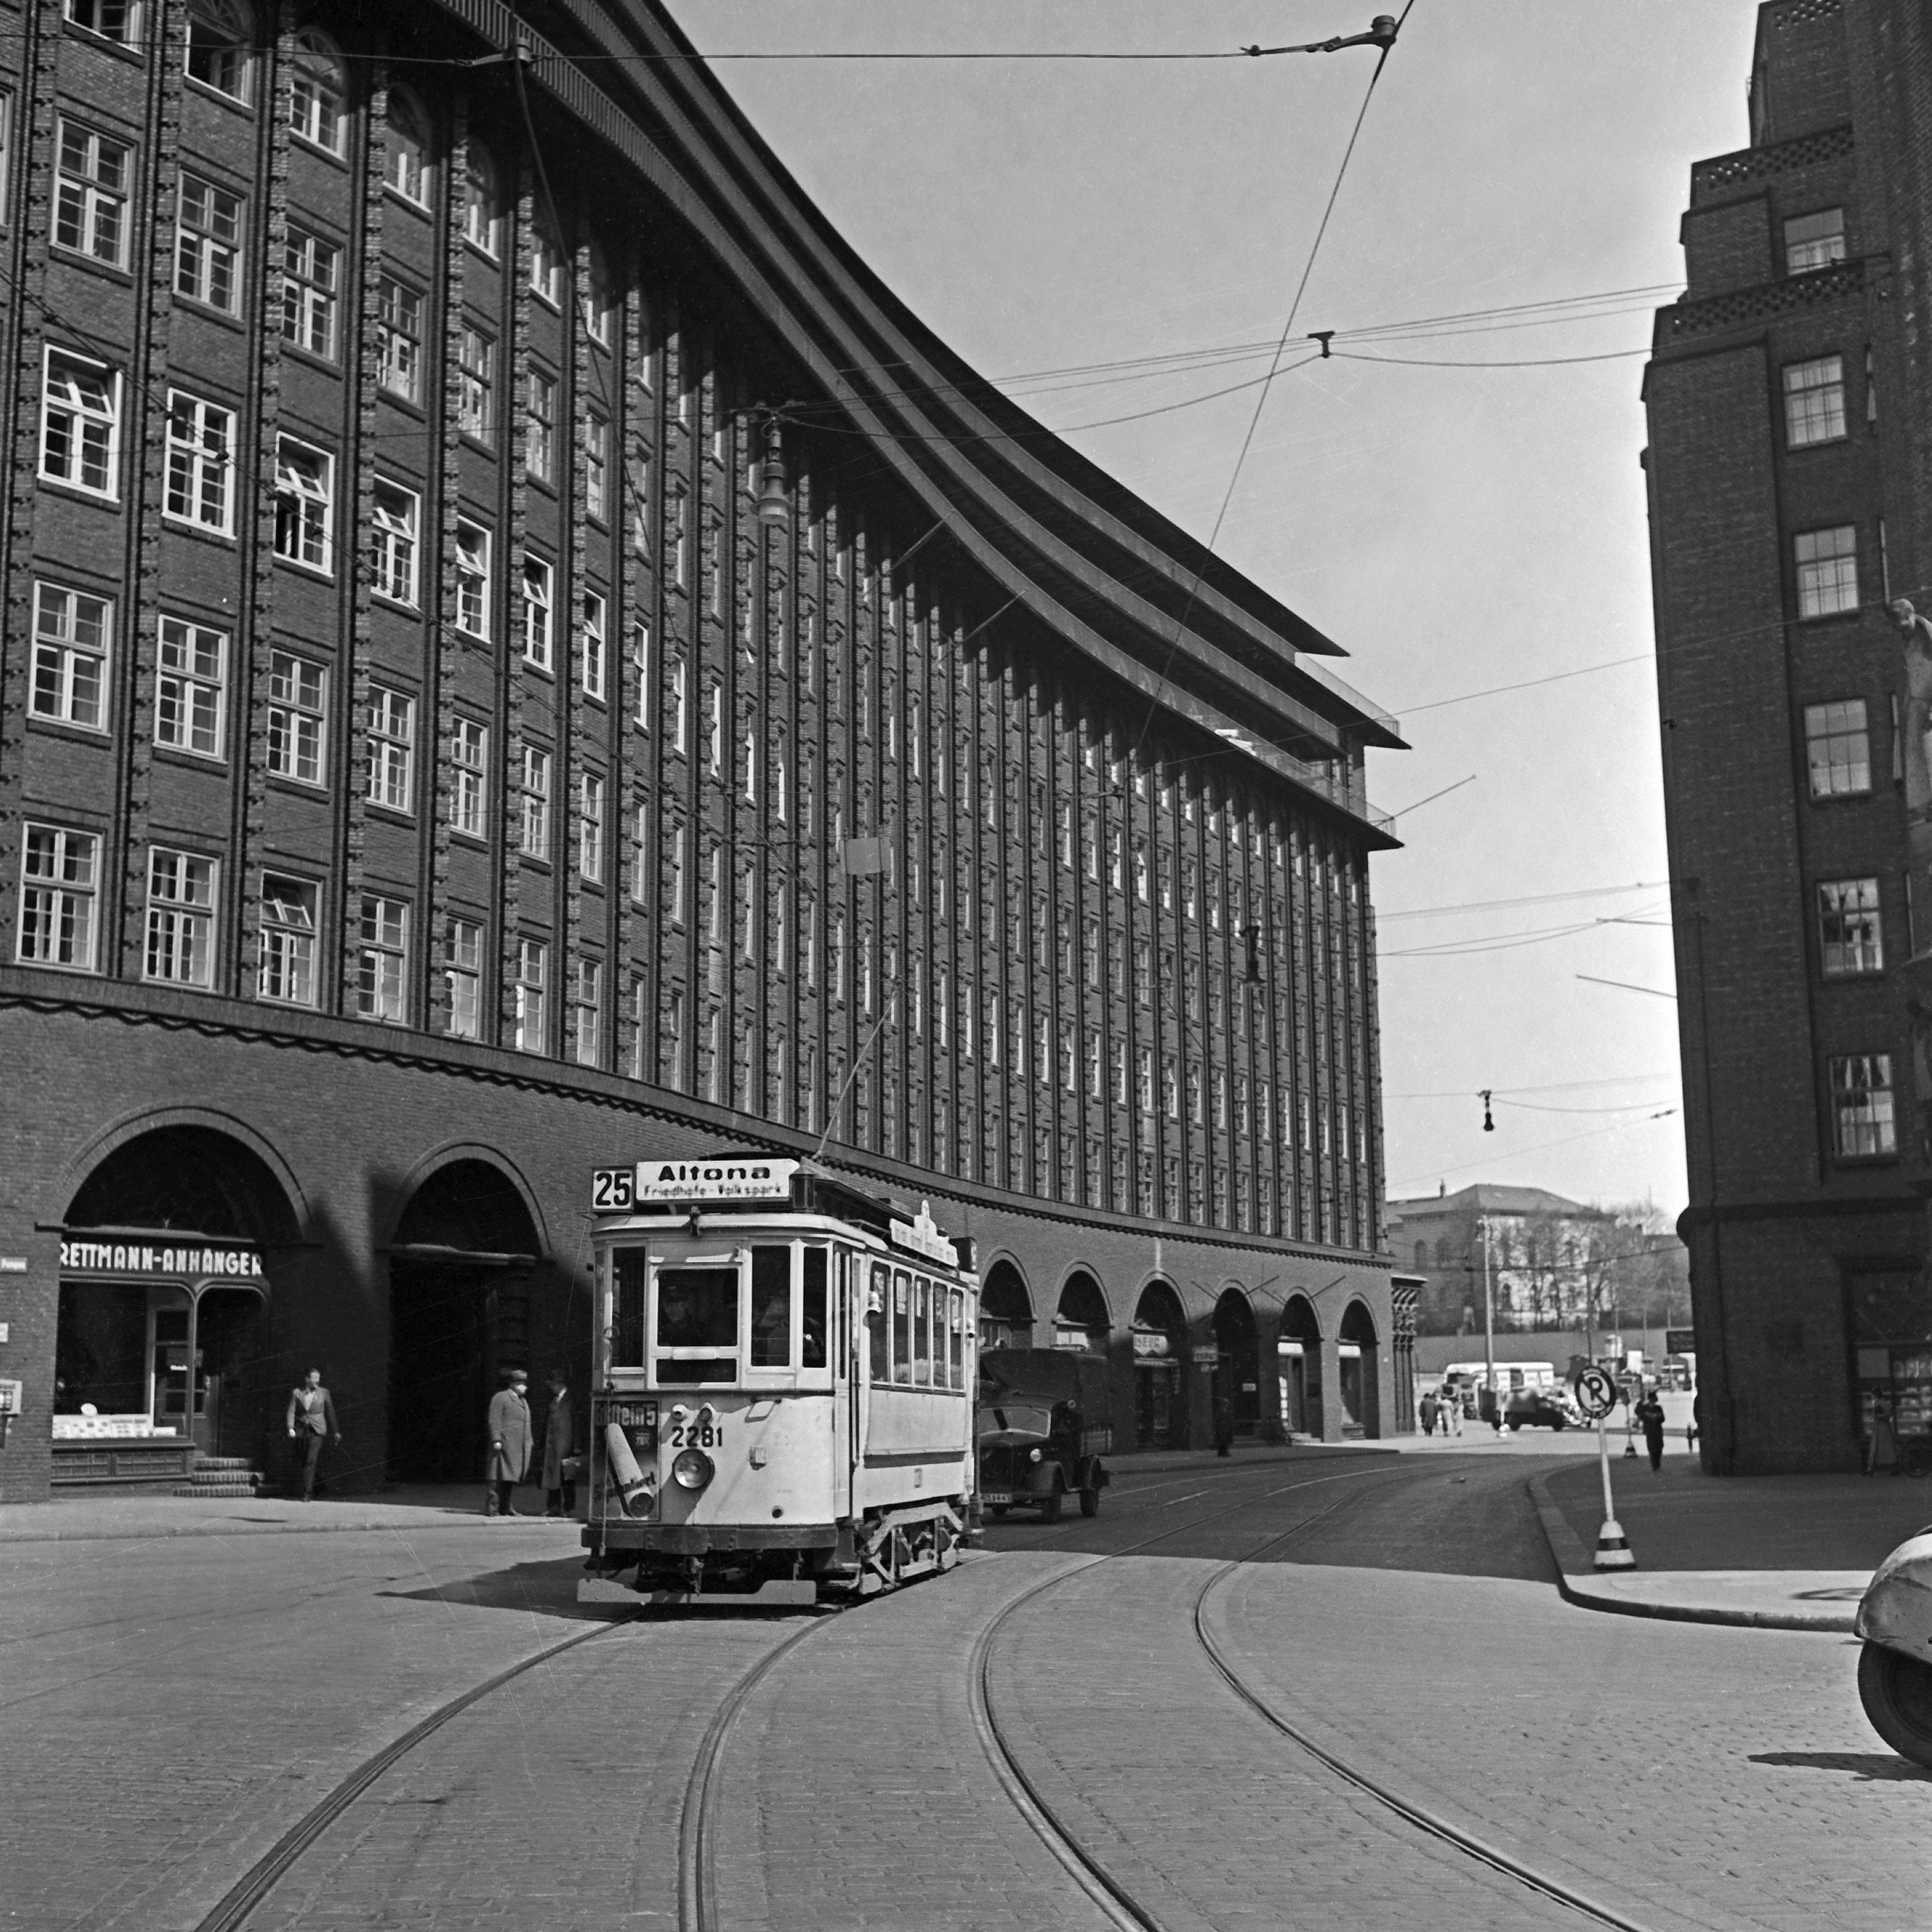 Karl Heinrich Lämmel Black and White Photograph - Chile House office building Hamburg with tram, Germany 1938, Printed Later 